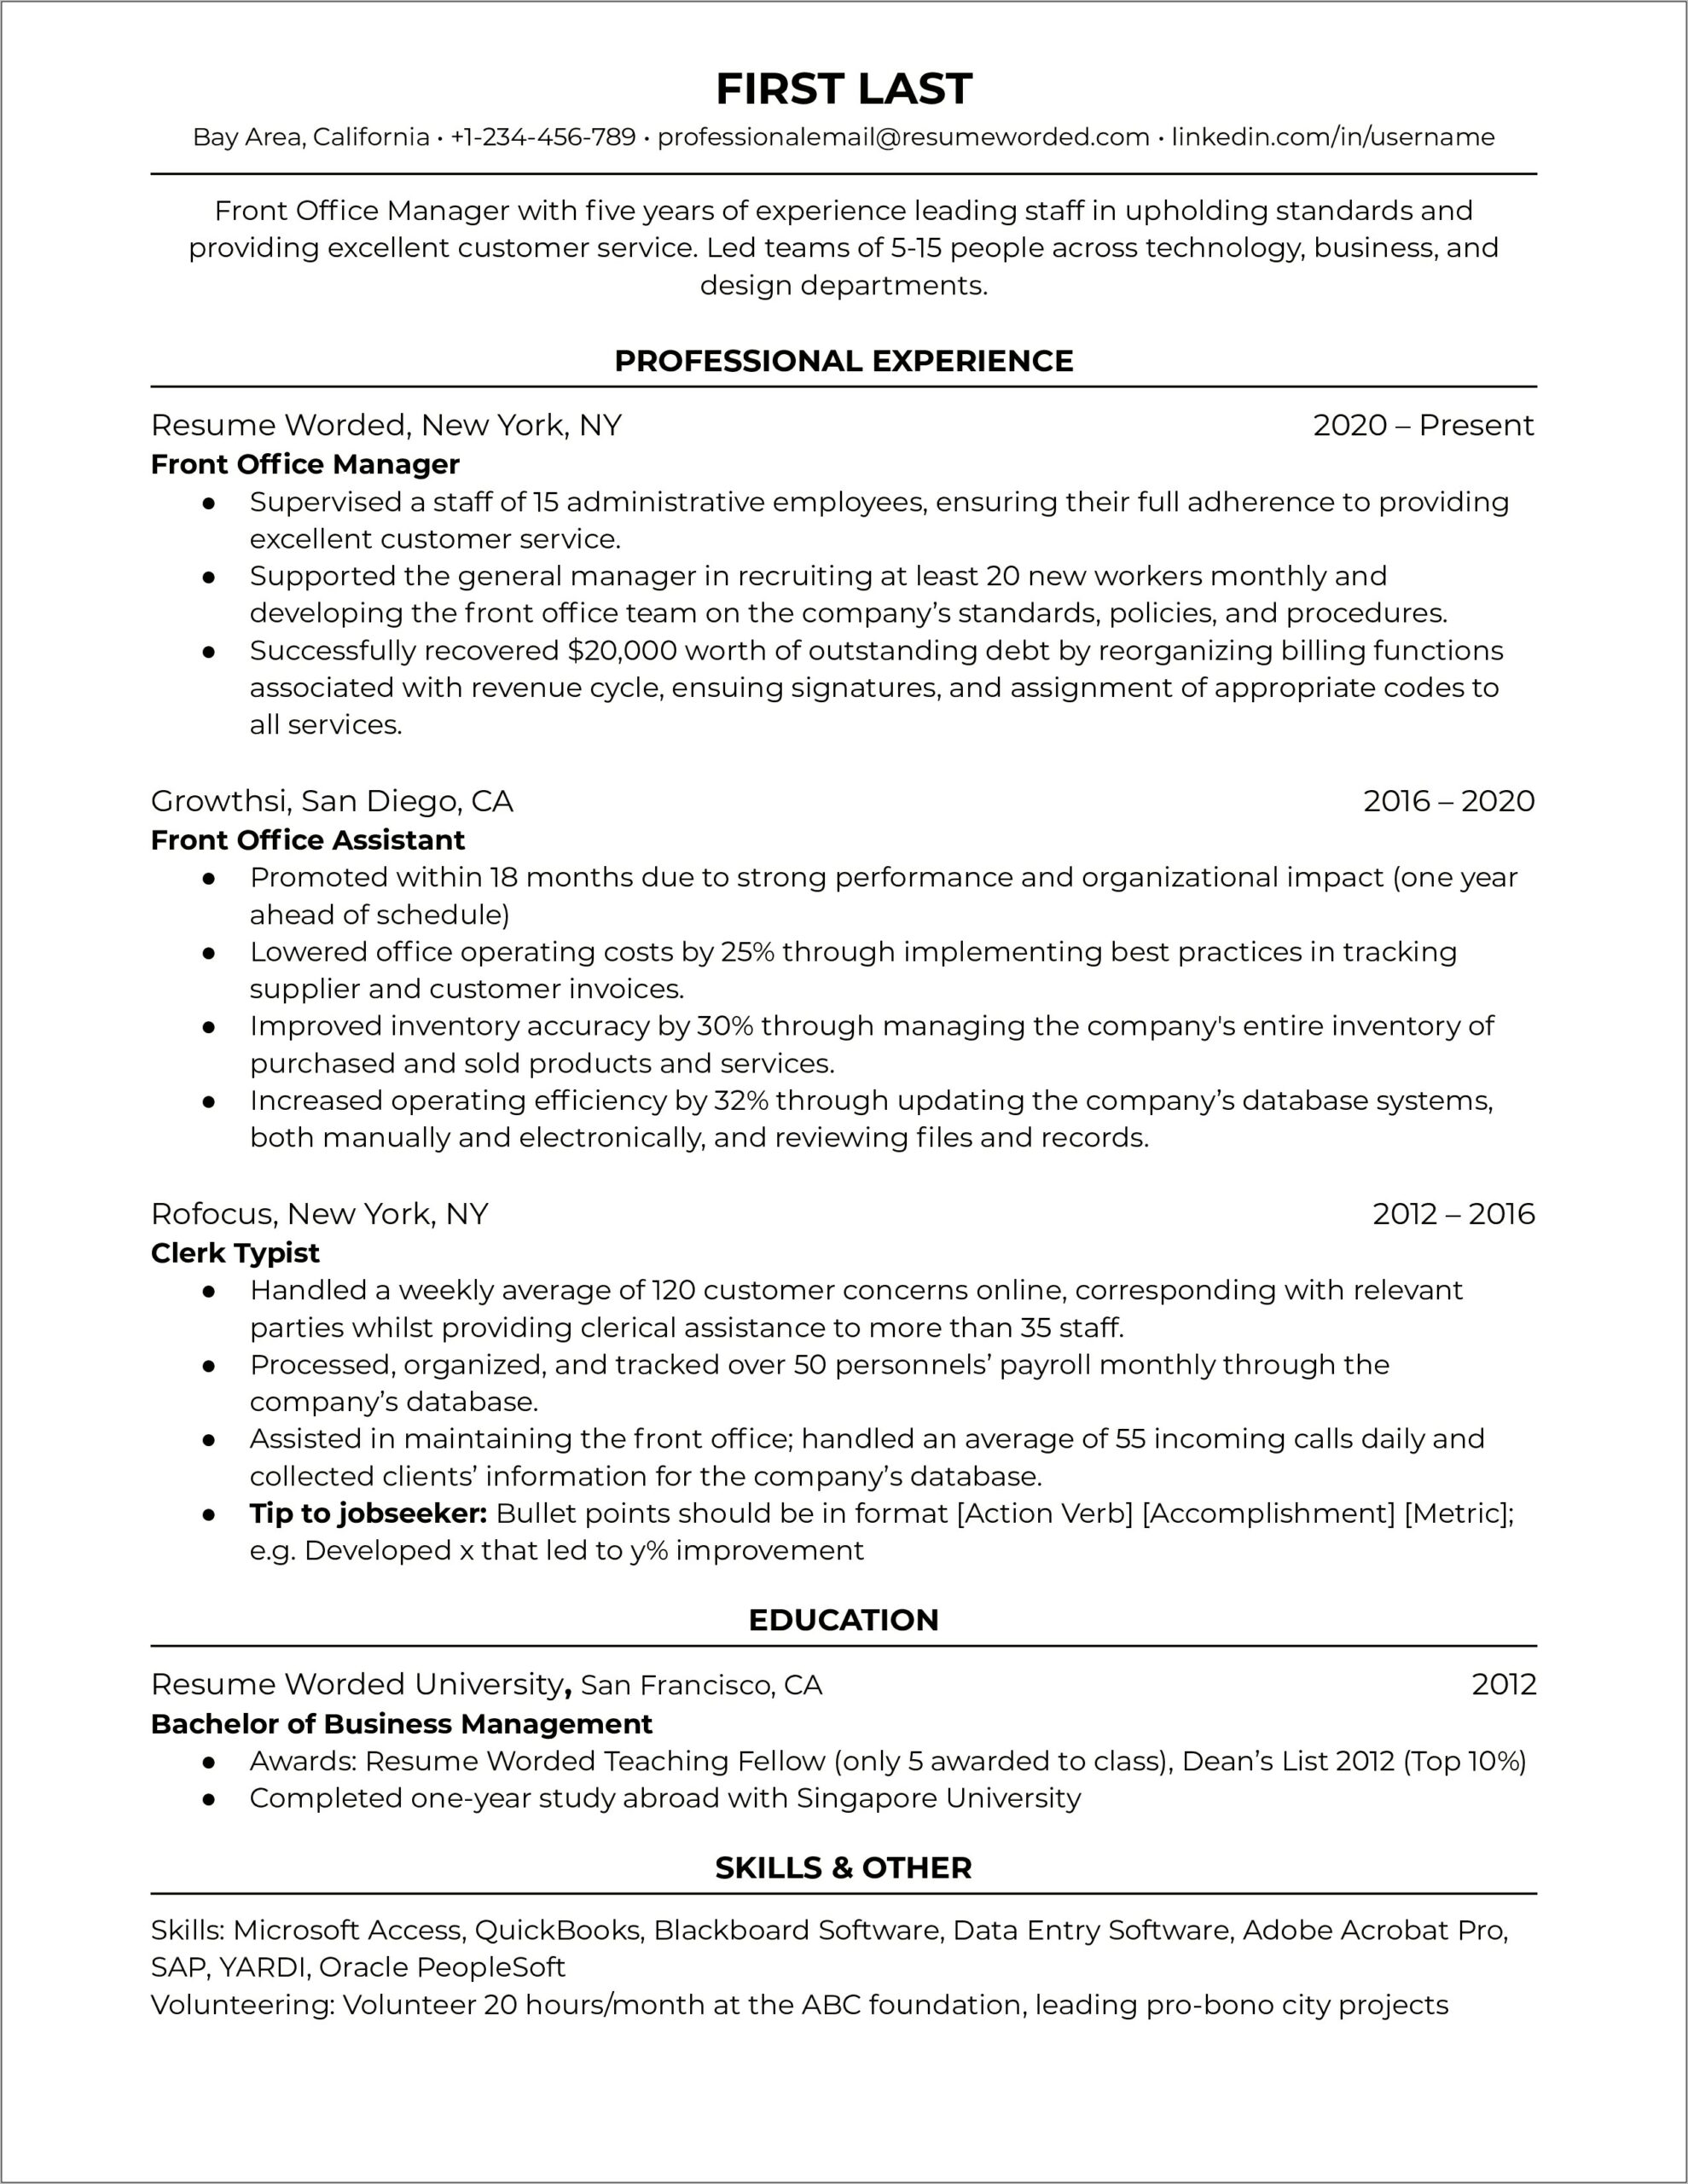 Hotel Front Office Manager Resume Pdf